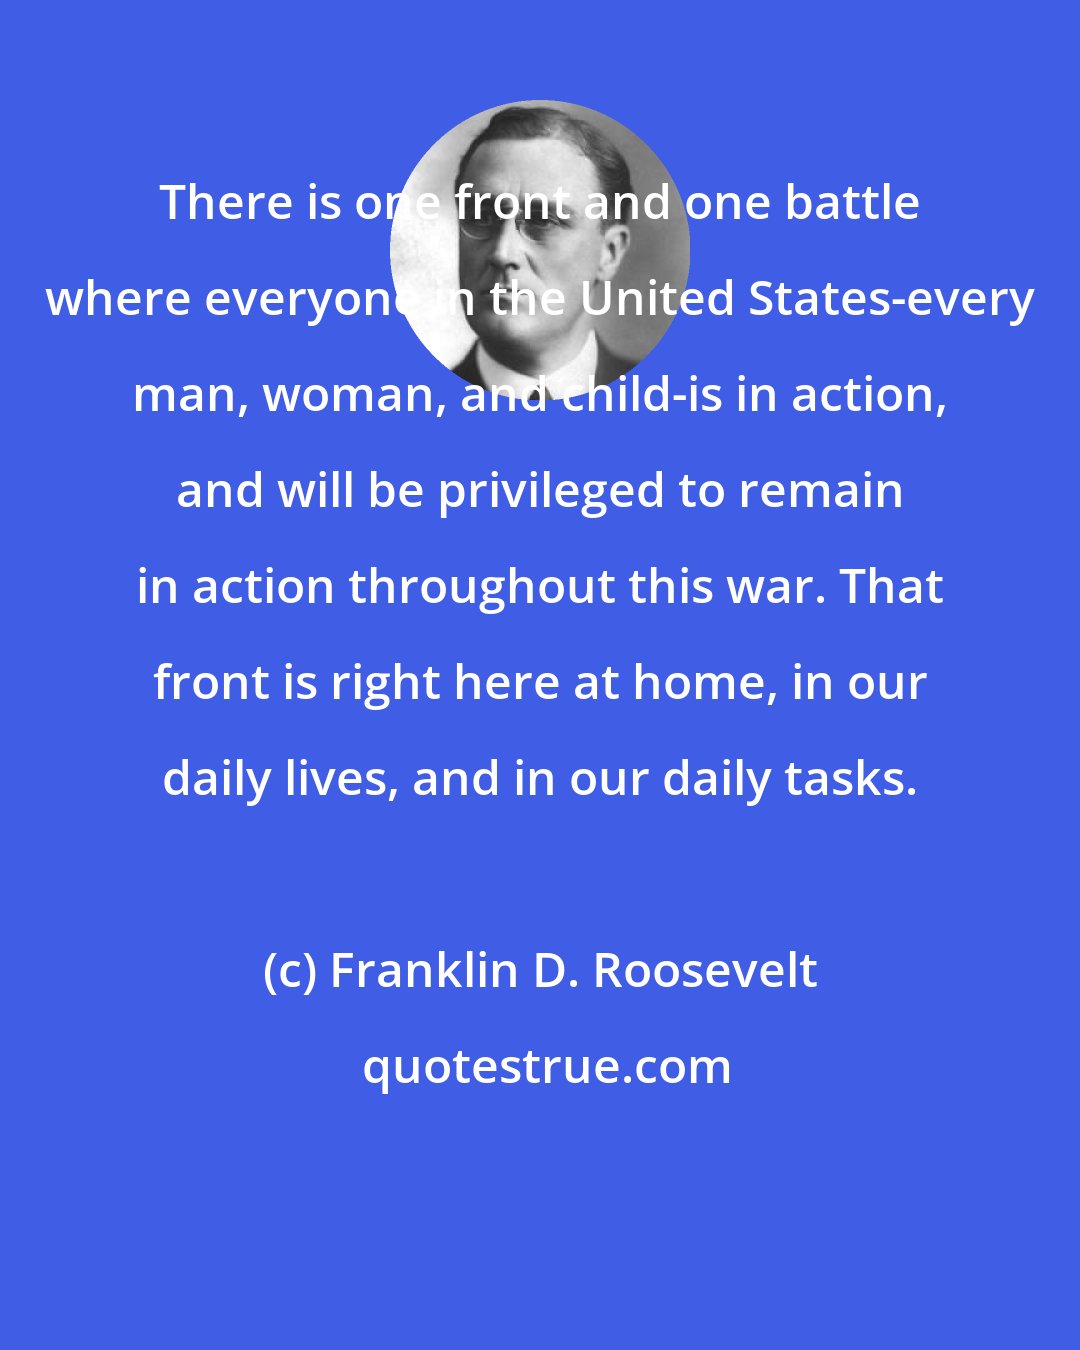 Franklin D. Roosevelt: There is one front and one battle where everyone in the United States-every man, woman, and child-is in action, and will be privileged to remain in action throughout this war. That front is right here at home, in our daily lives, and in our daily tasks.